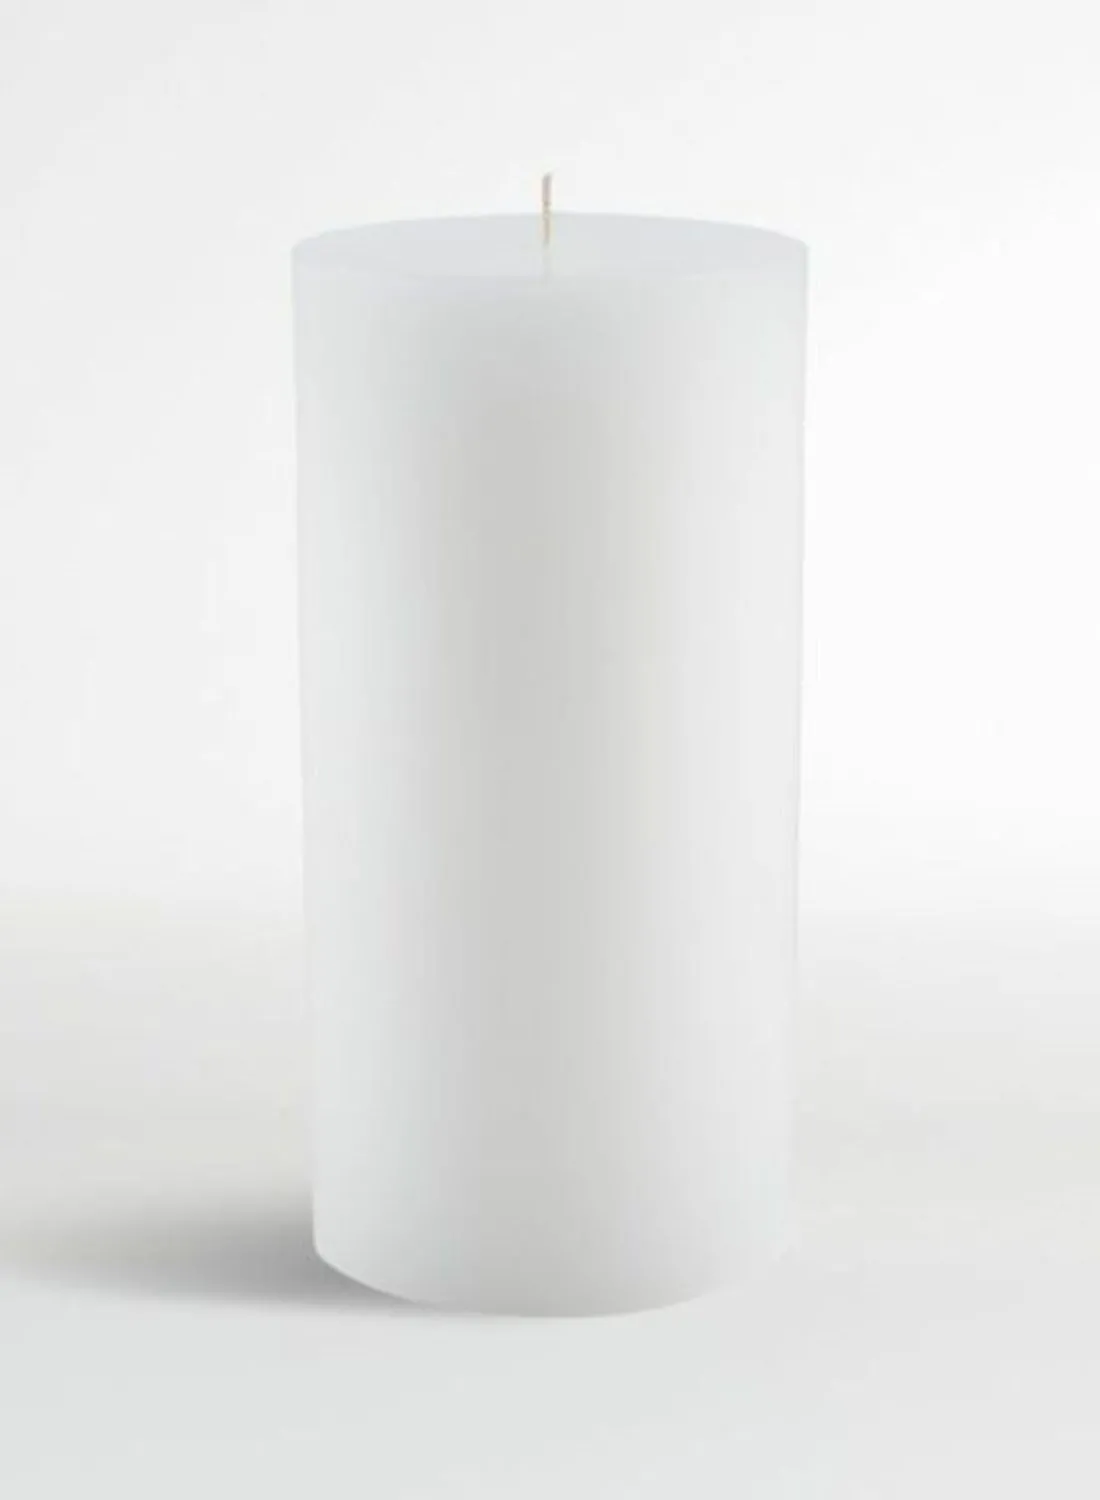 ebb & flow 4-Piece Unscented Wax Pillar Candles Set 525g Unique Luxury Quality Product For The Perfect Stylish Home White 3 x 5.5inch